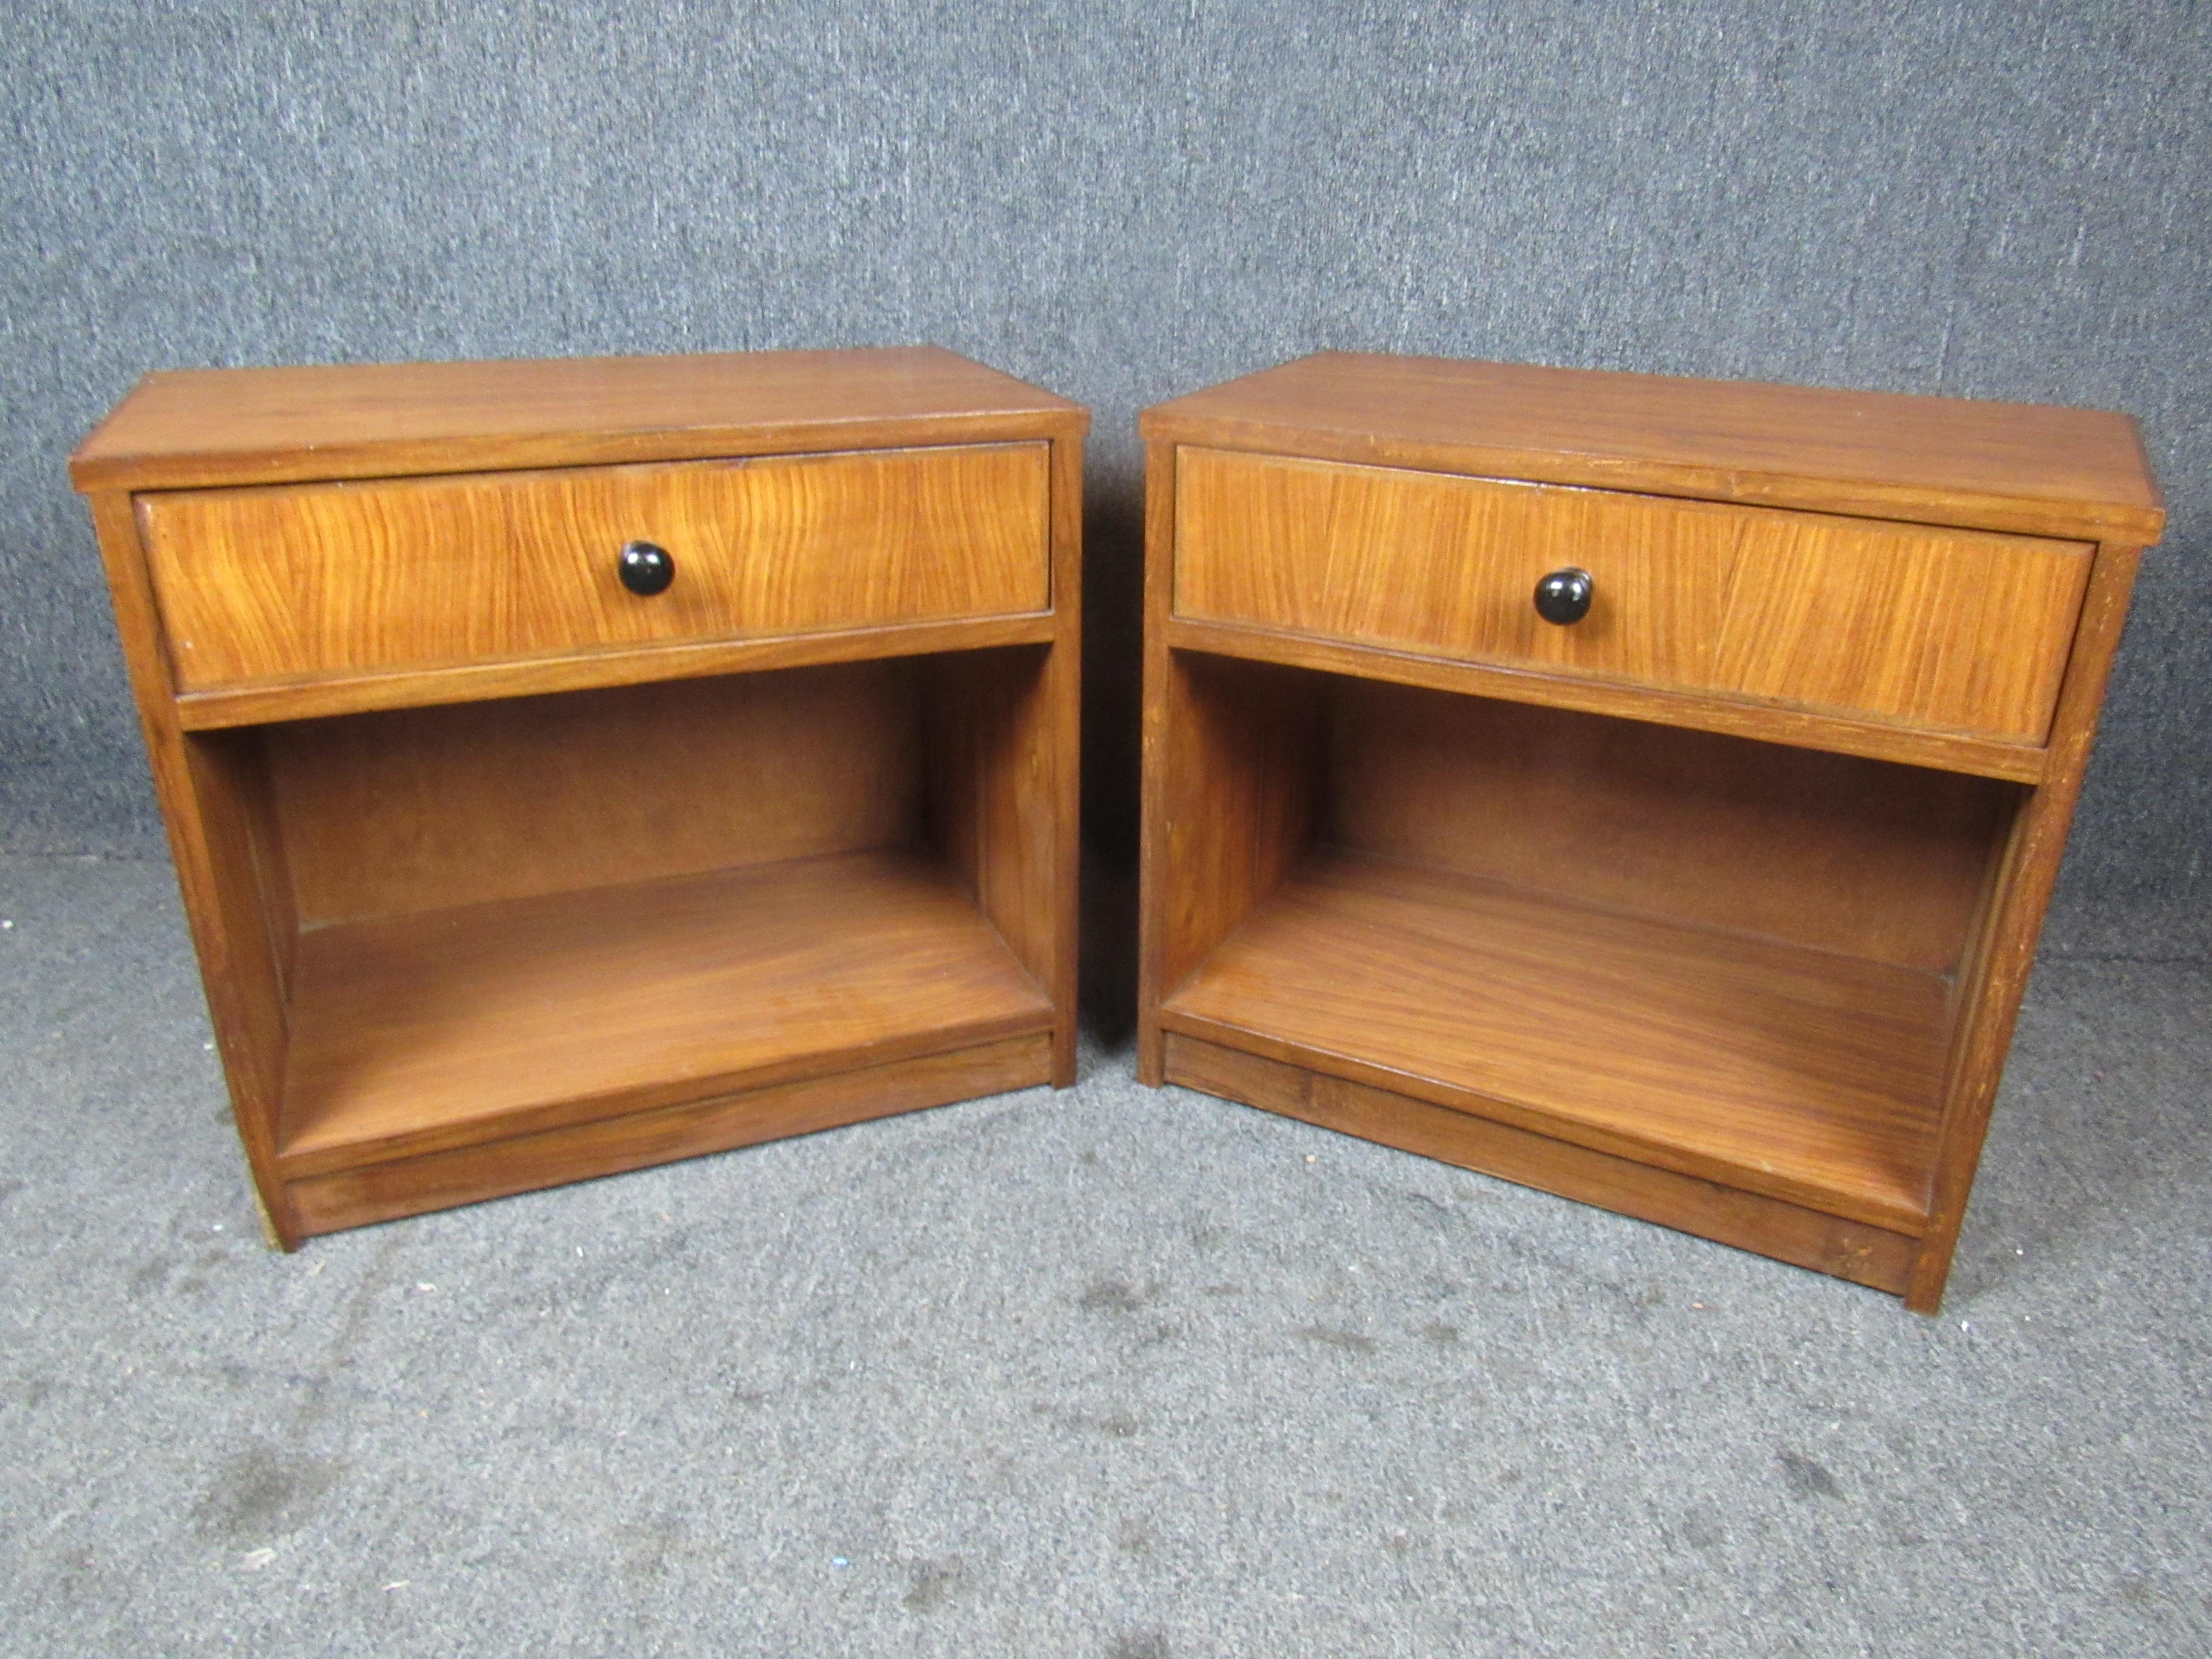 Pair of Mid-Century Modern night stands. Classic midcentury look featuring open storage on the bottom, pull drawer on top, and black spherical pull handles.